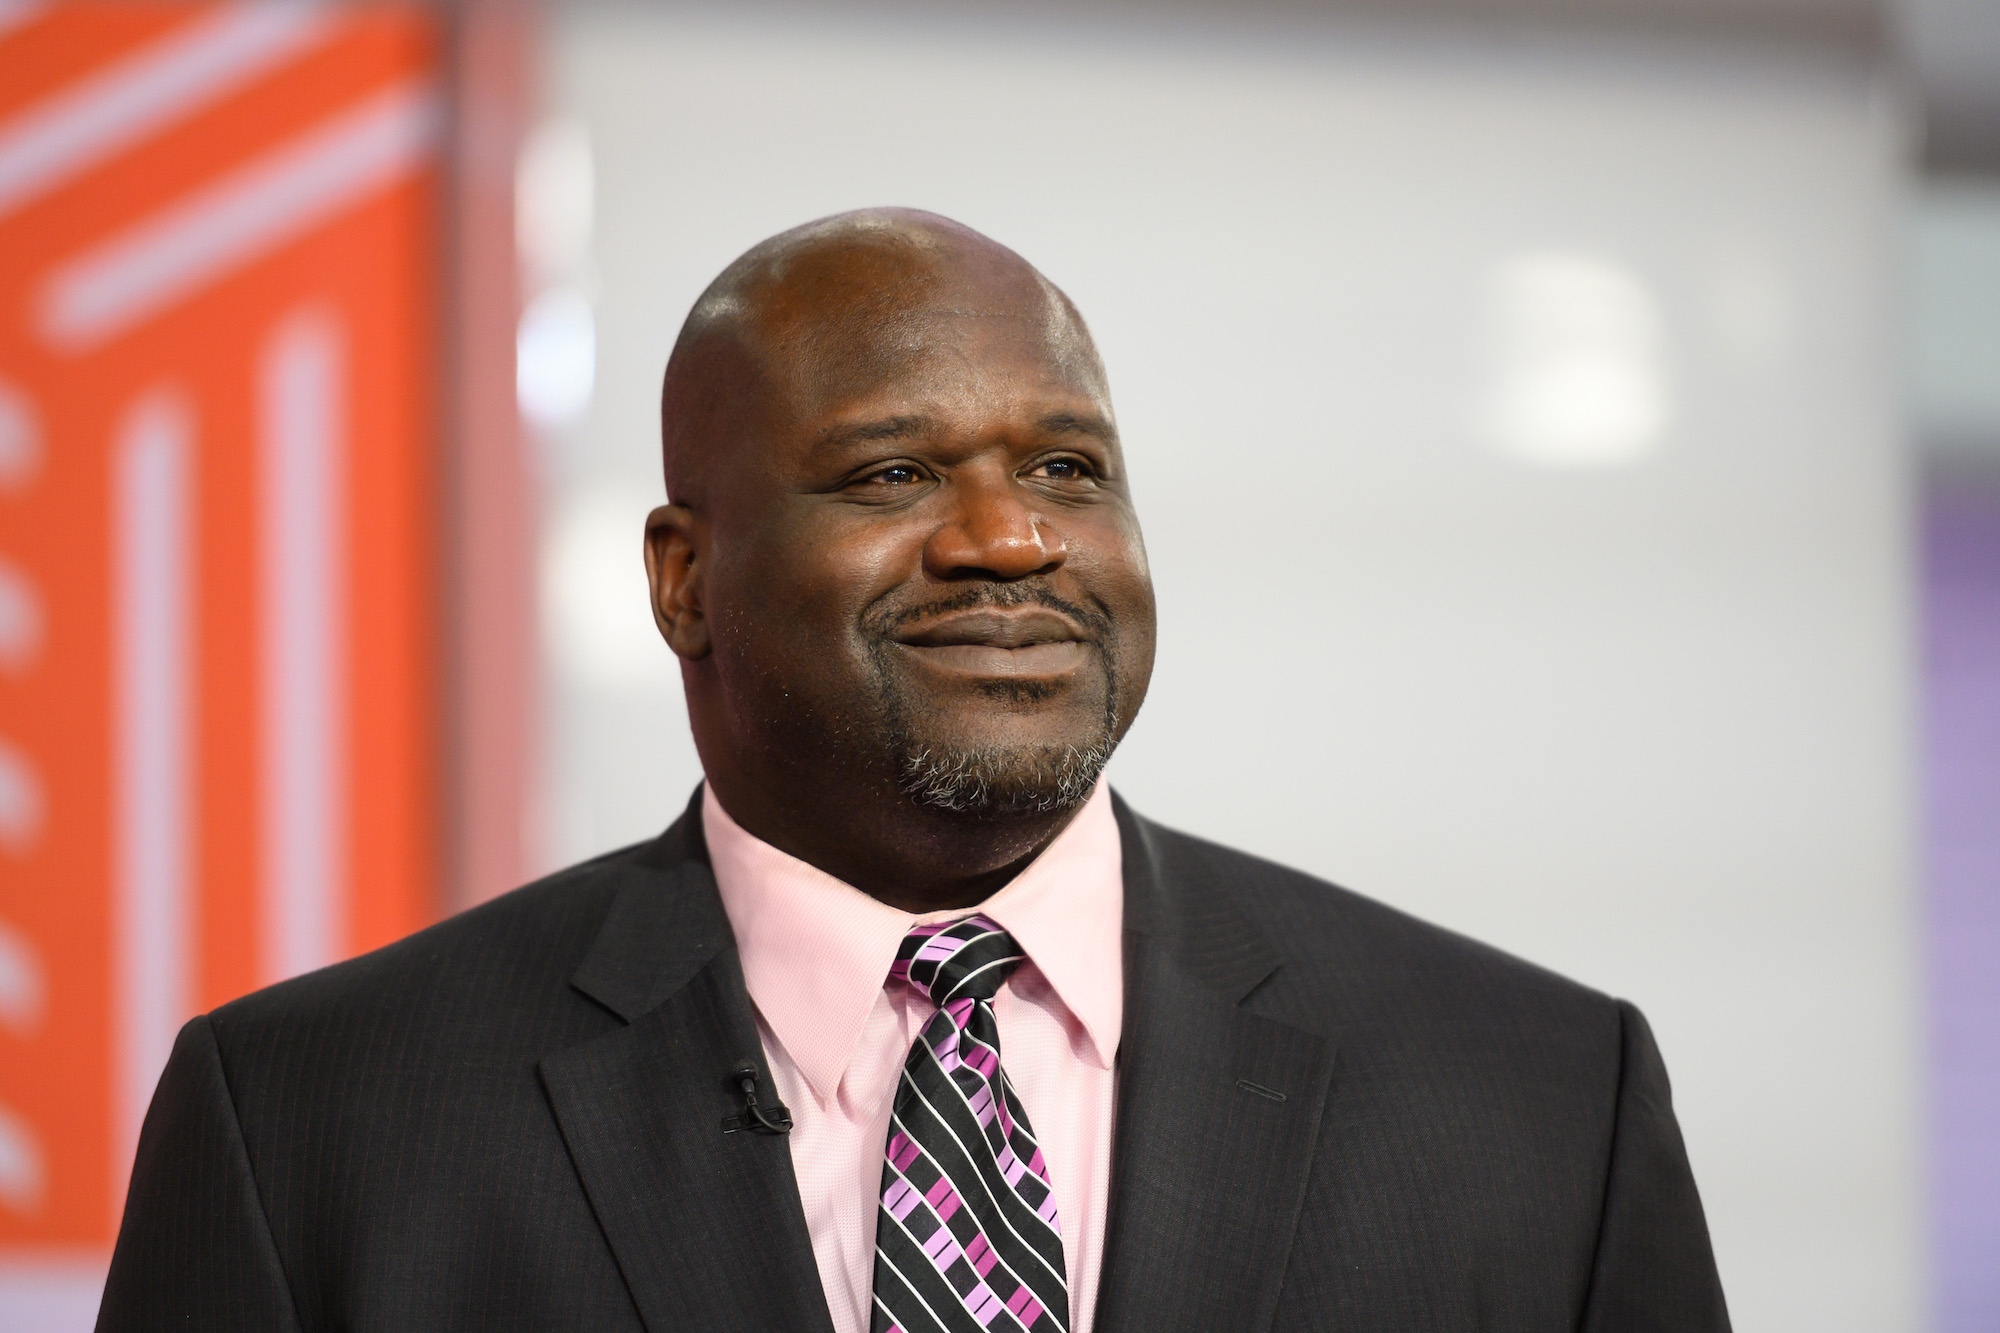 Shaquille O'Neal smiling, looking to the right